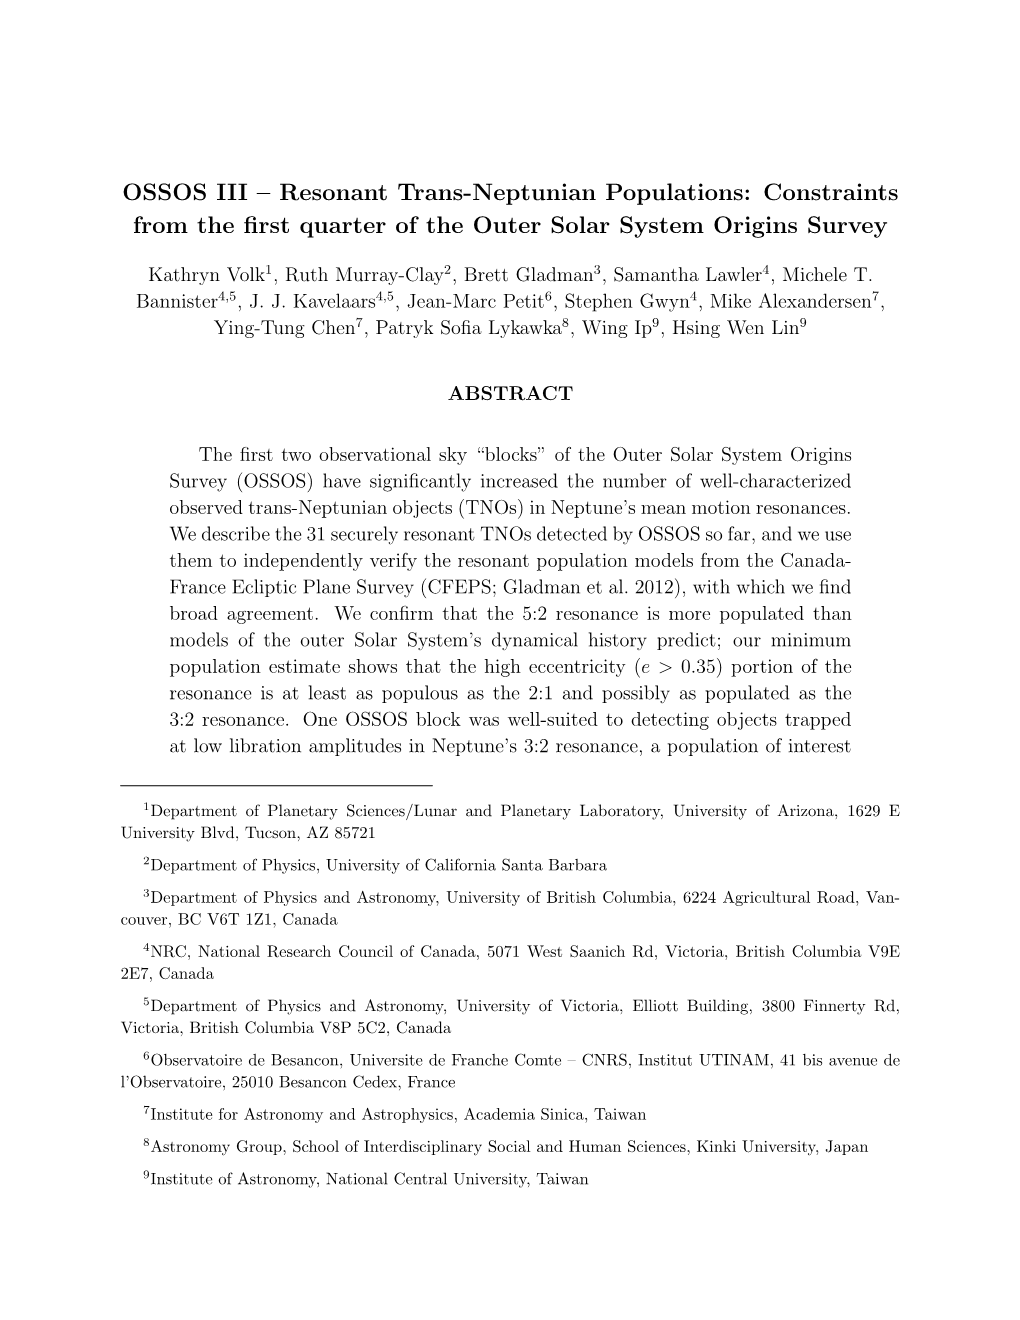 OSSOS III – Resonant Trans-Neptunian Populations: Constraints from the ﬁrst Quarter of the Outer Solar System Origins Survey